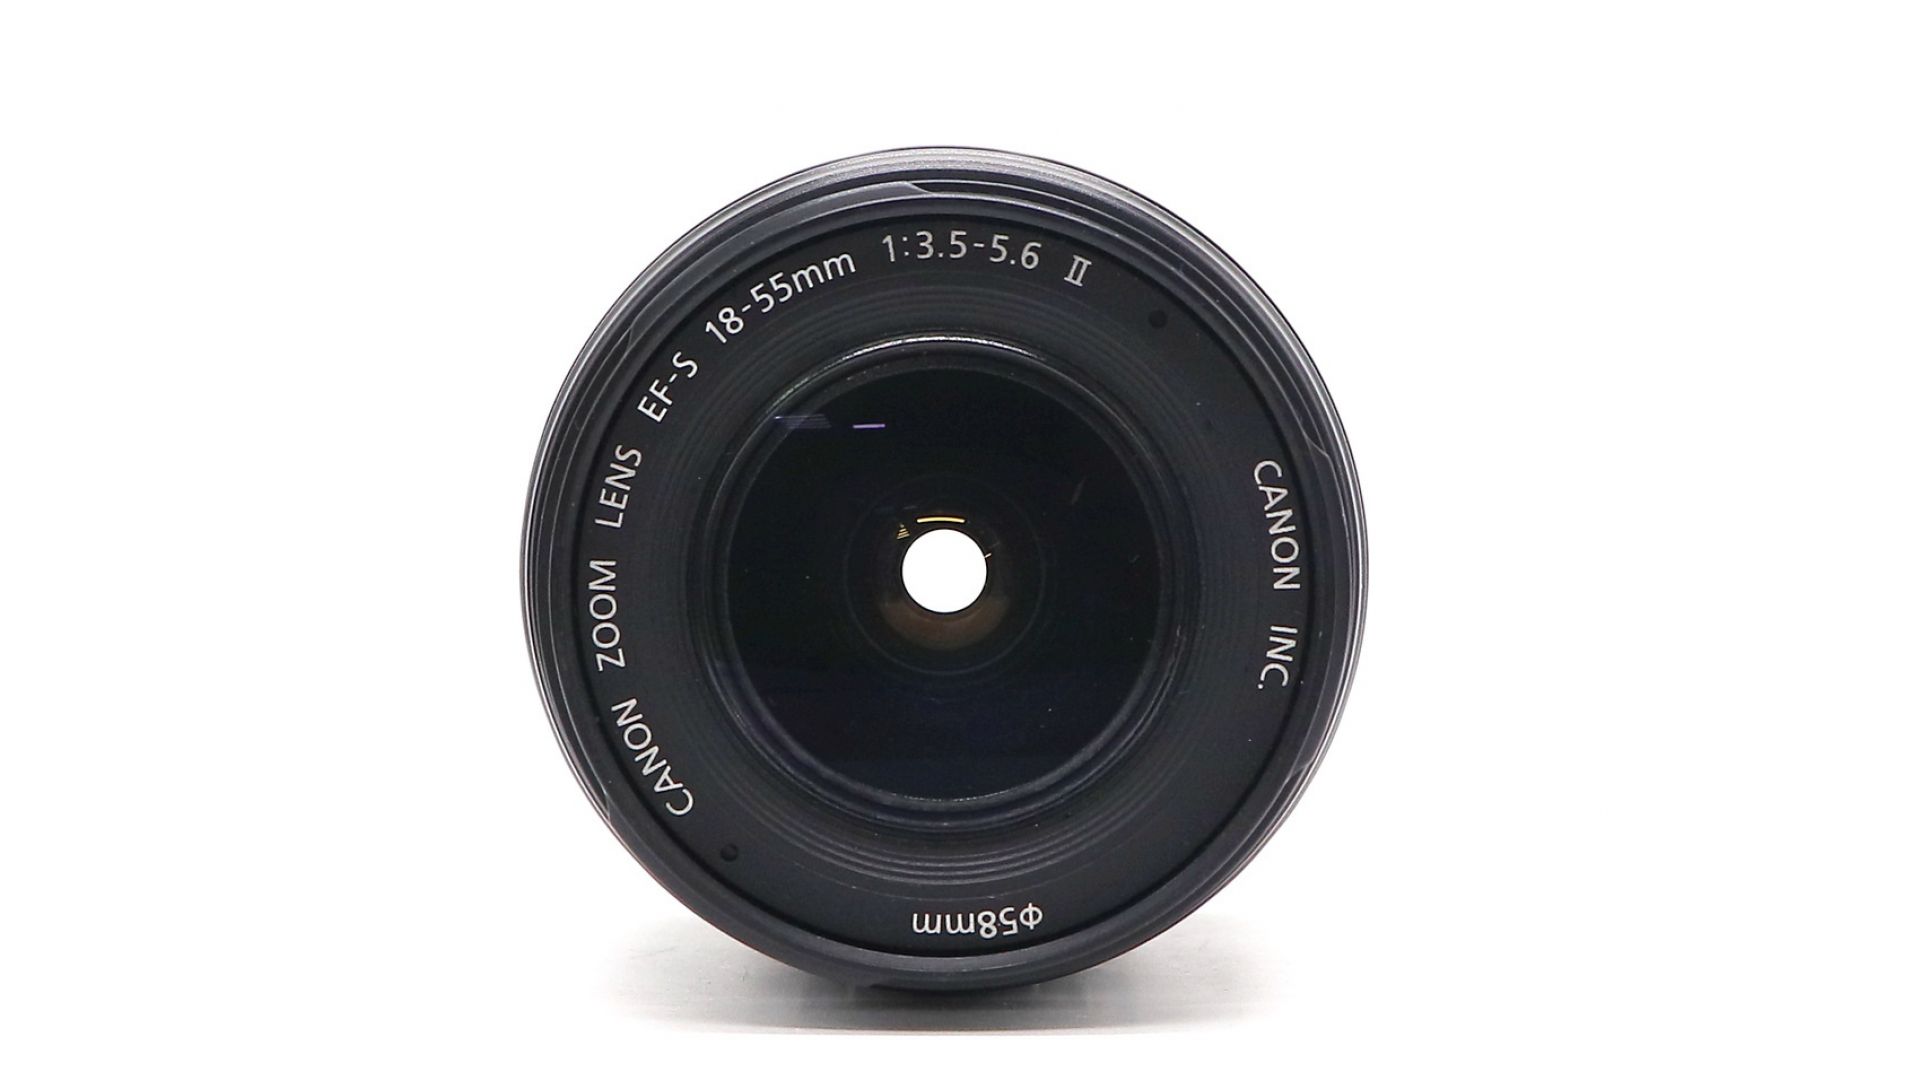 Canon ef s 18 55mm kit